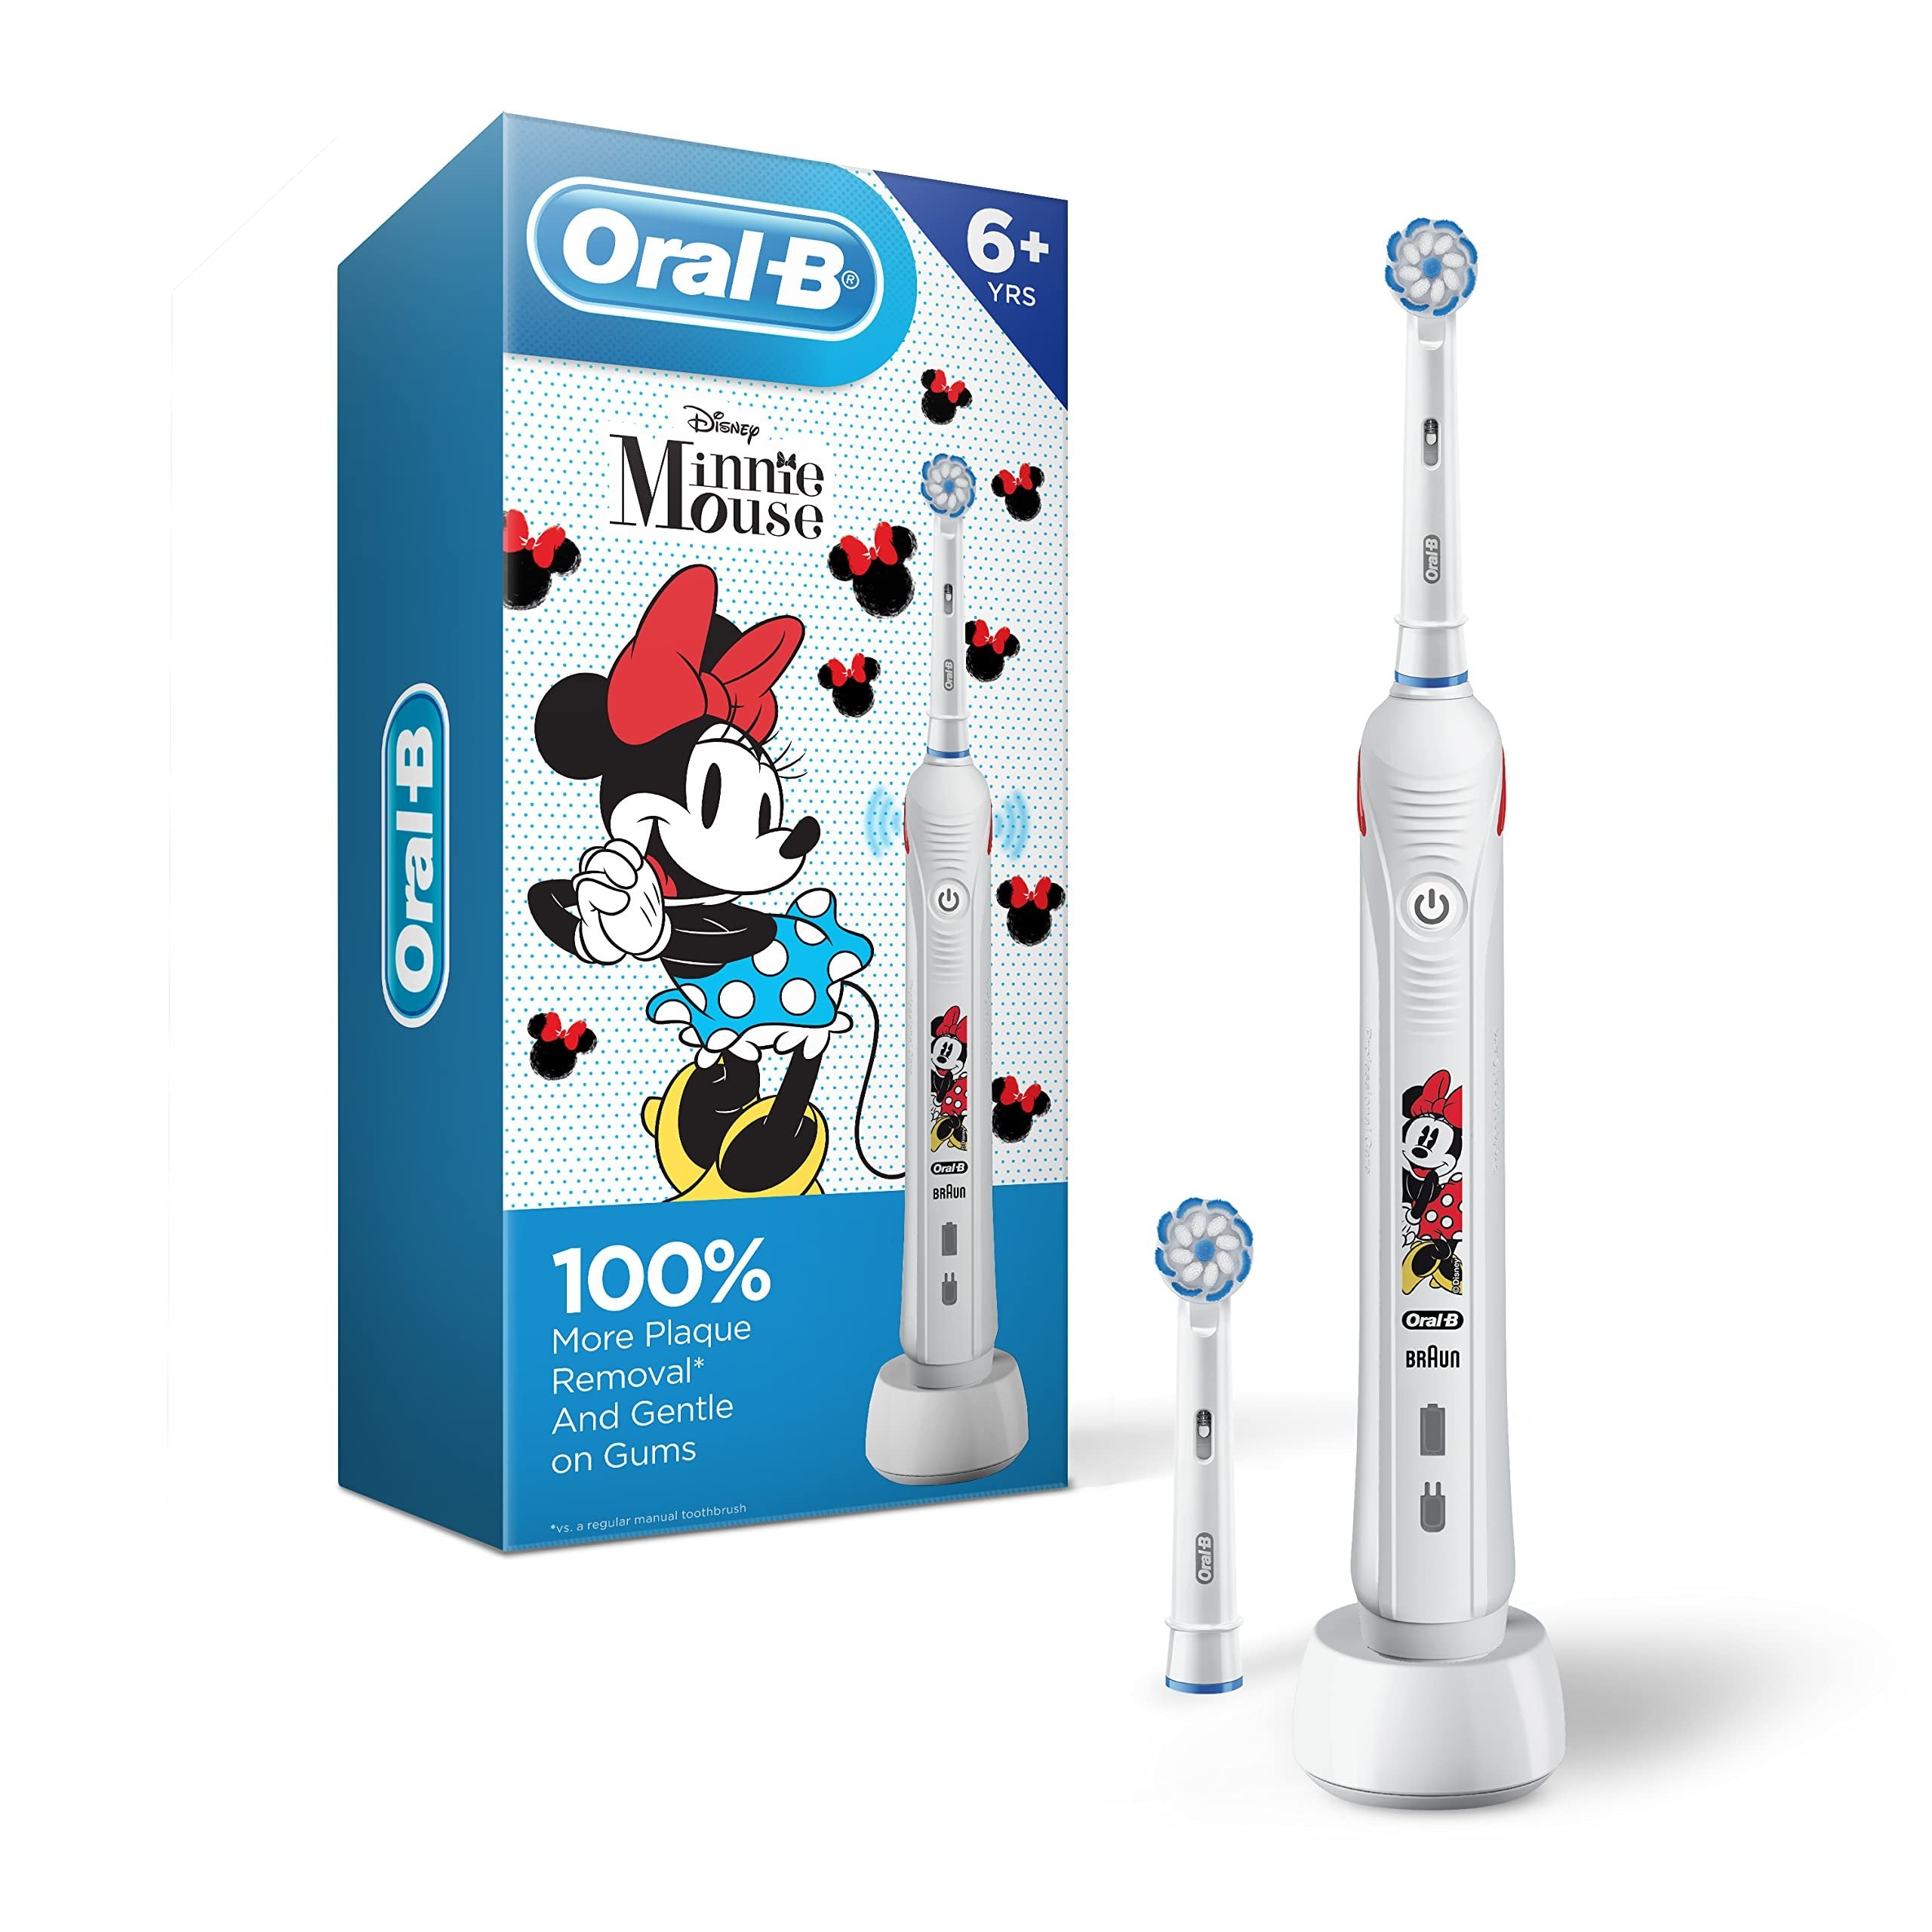 Oral-B Kids Electric Toothbrush Featuring Disney's Minnie Mouse, Rechargeable Toothbrush with (2) Brush Heads, for Kids 6+